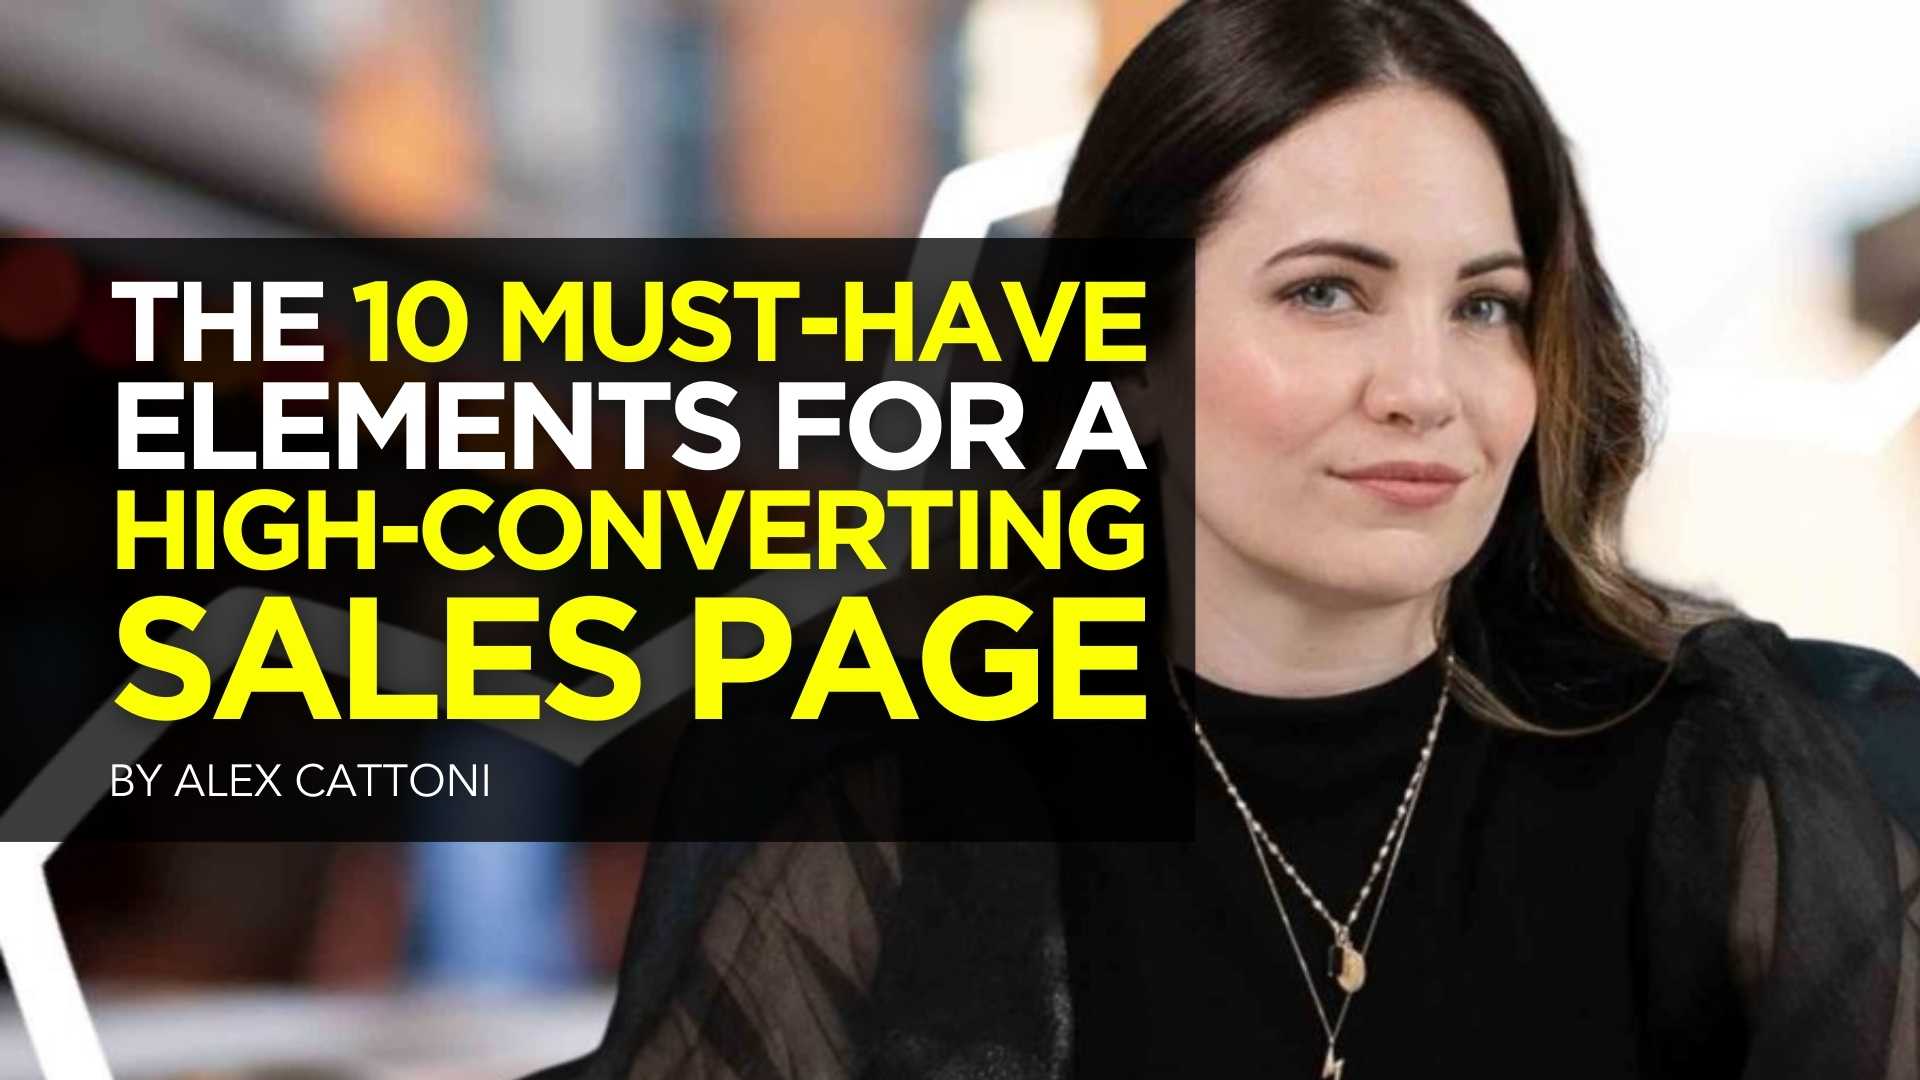 The 10 Must-Have Elements for a High-Converting Sales Page